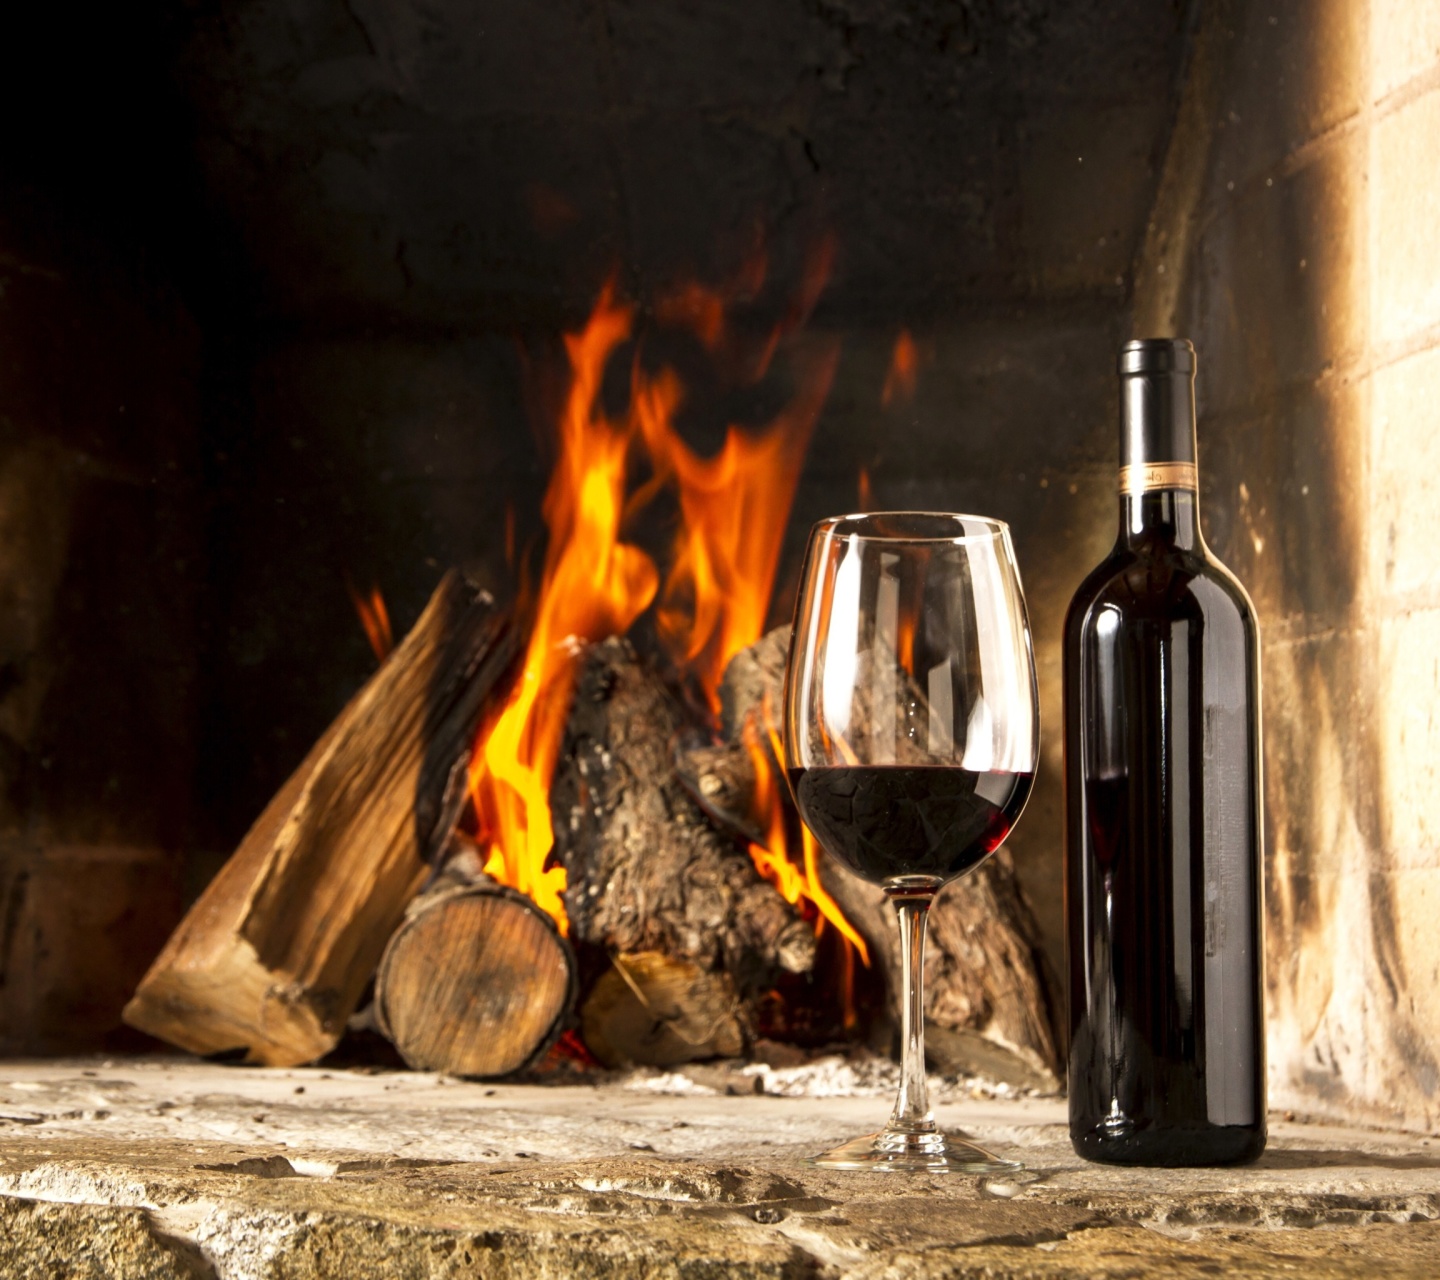 Wine and fireplace wallpaper 1440x1280